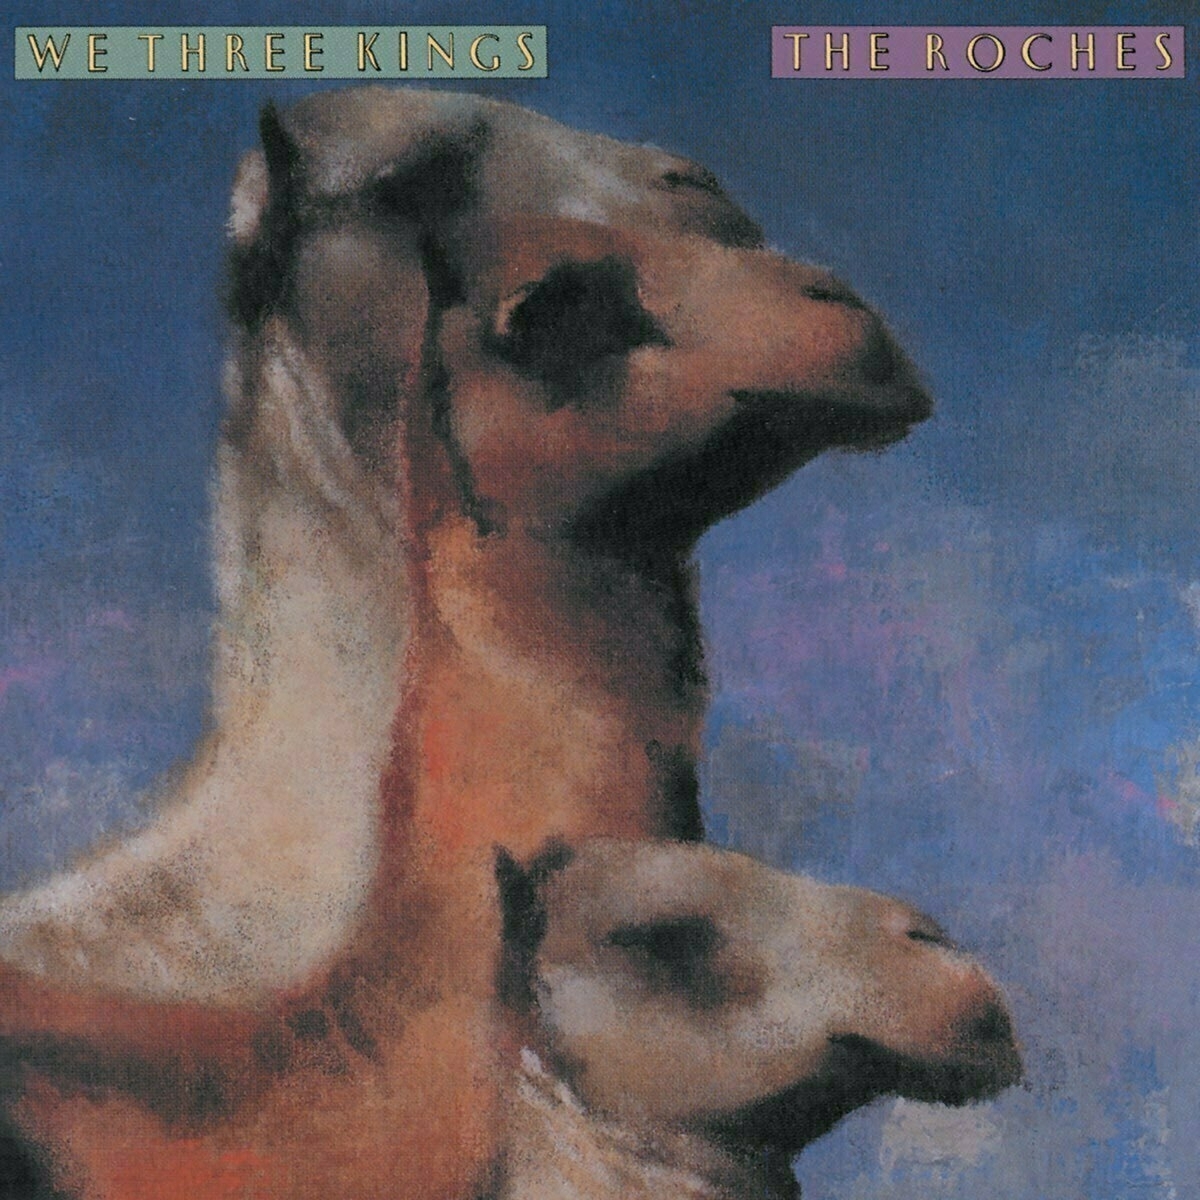 Cover  art depicting three camels for an album of Christmas songs by The Roches